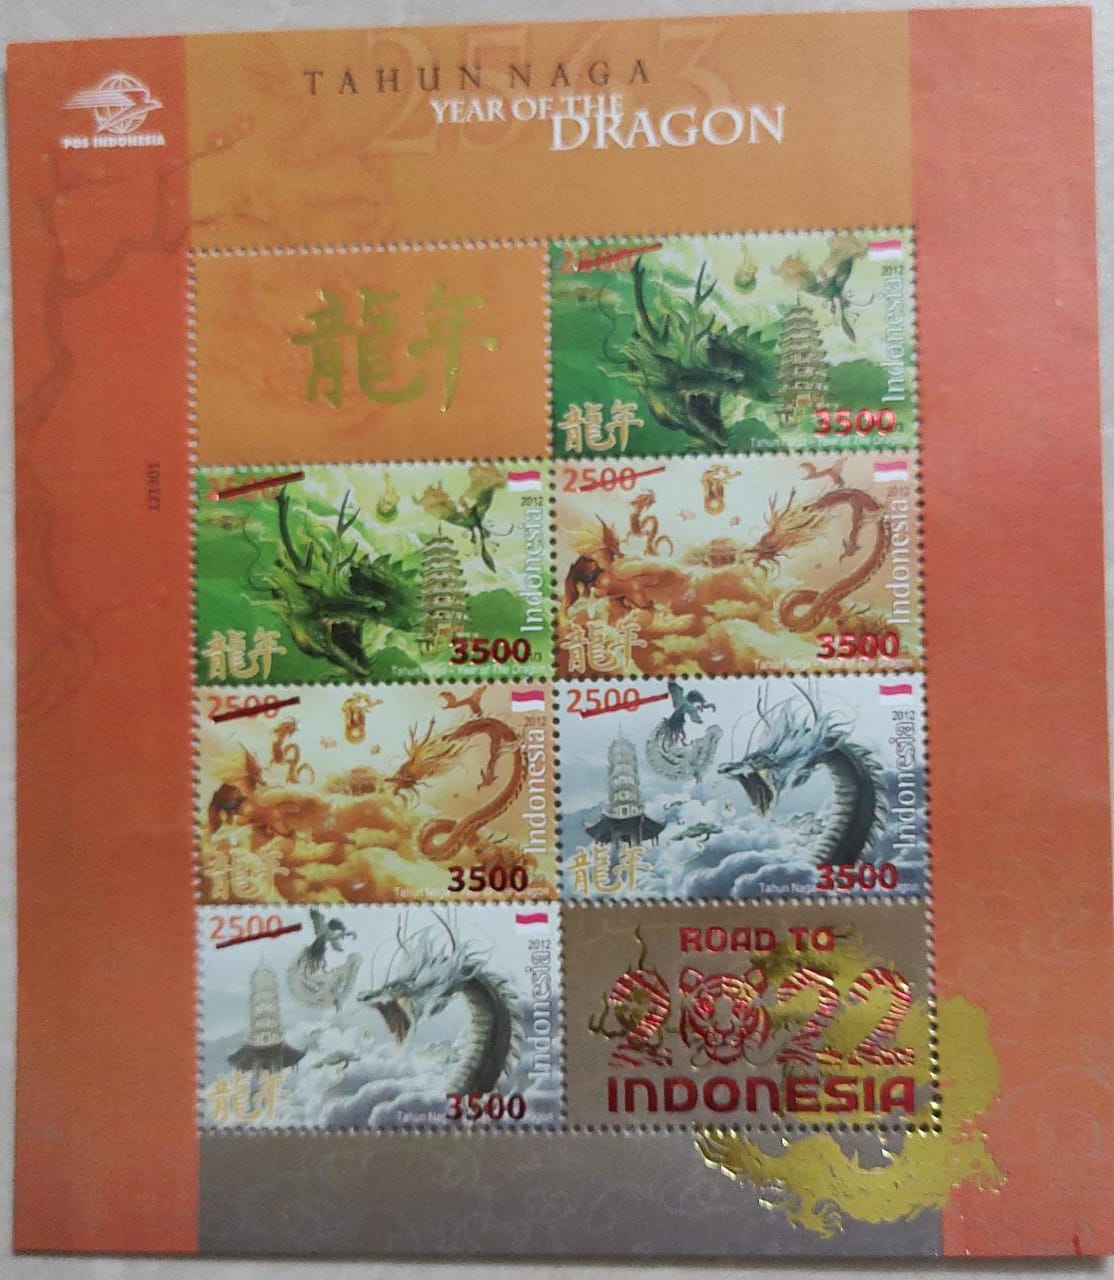 Rare issue with overprint  Indonesia ms on year of 🐉🐲 dragon.